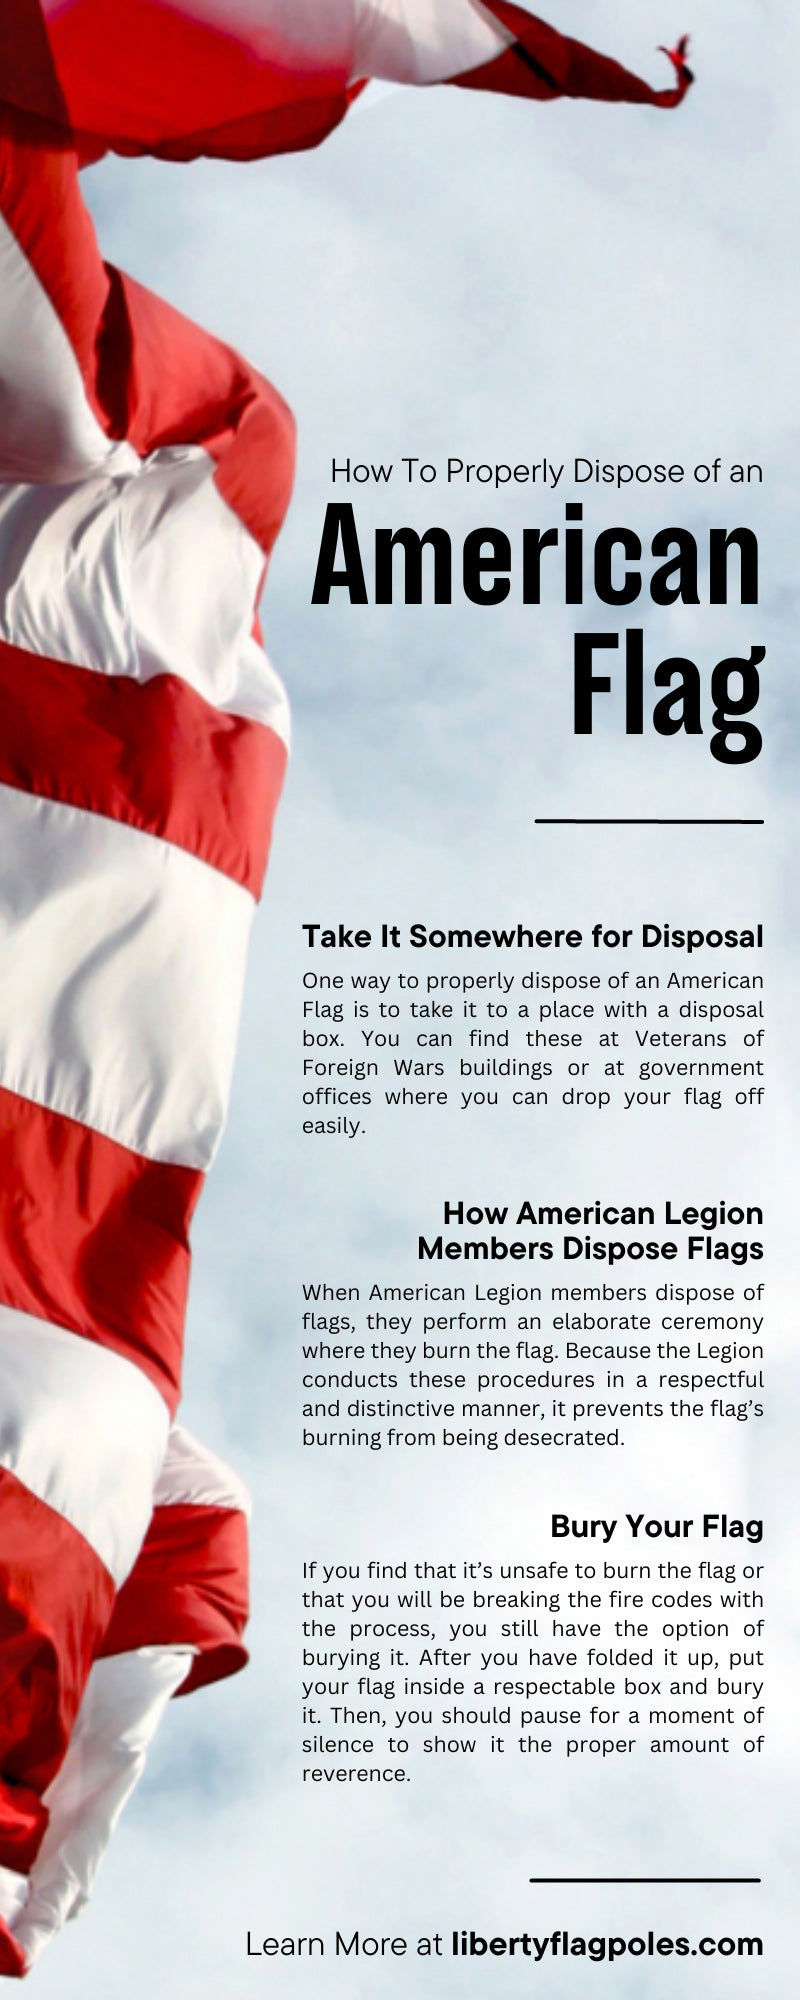 How To Properly Dispose of an American Flag